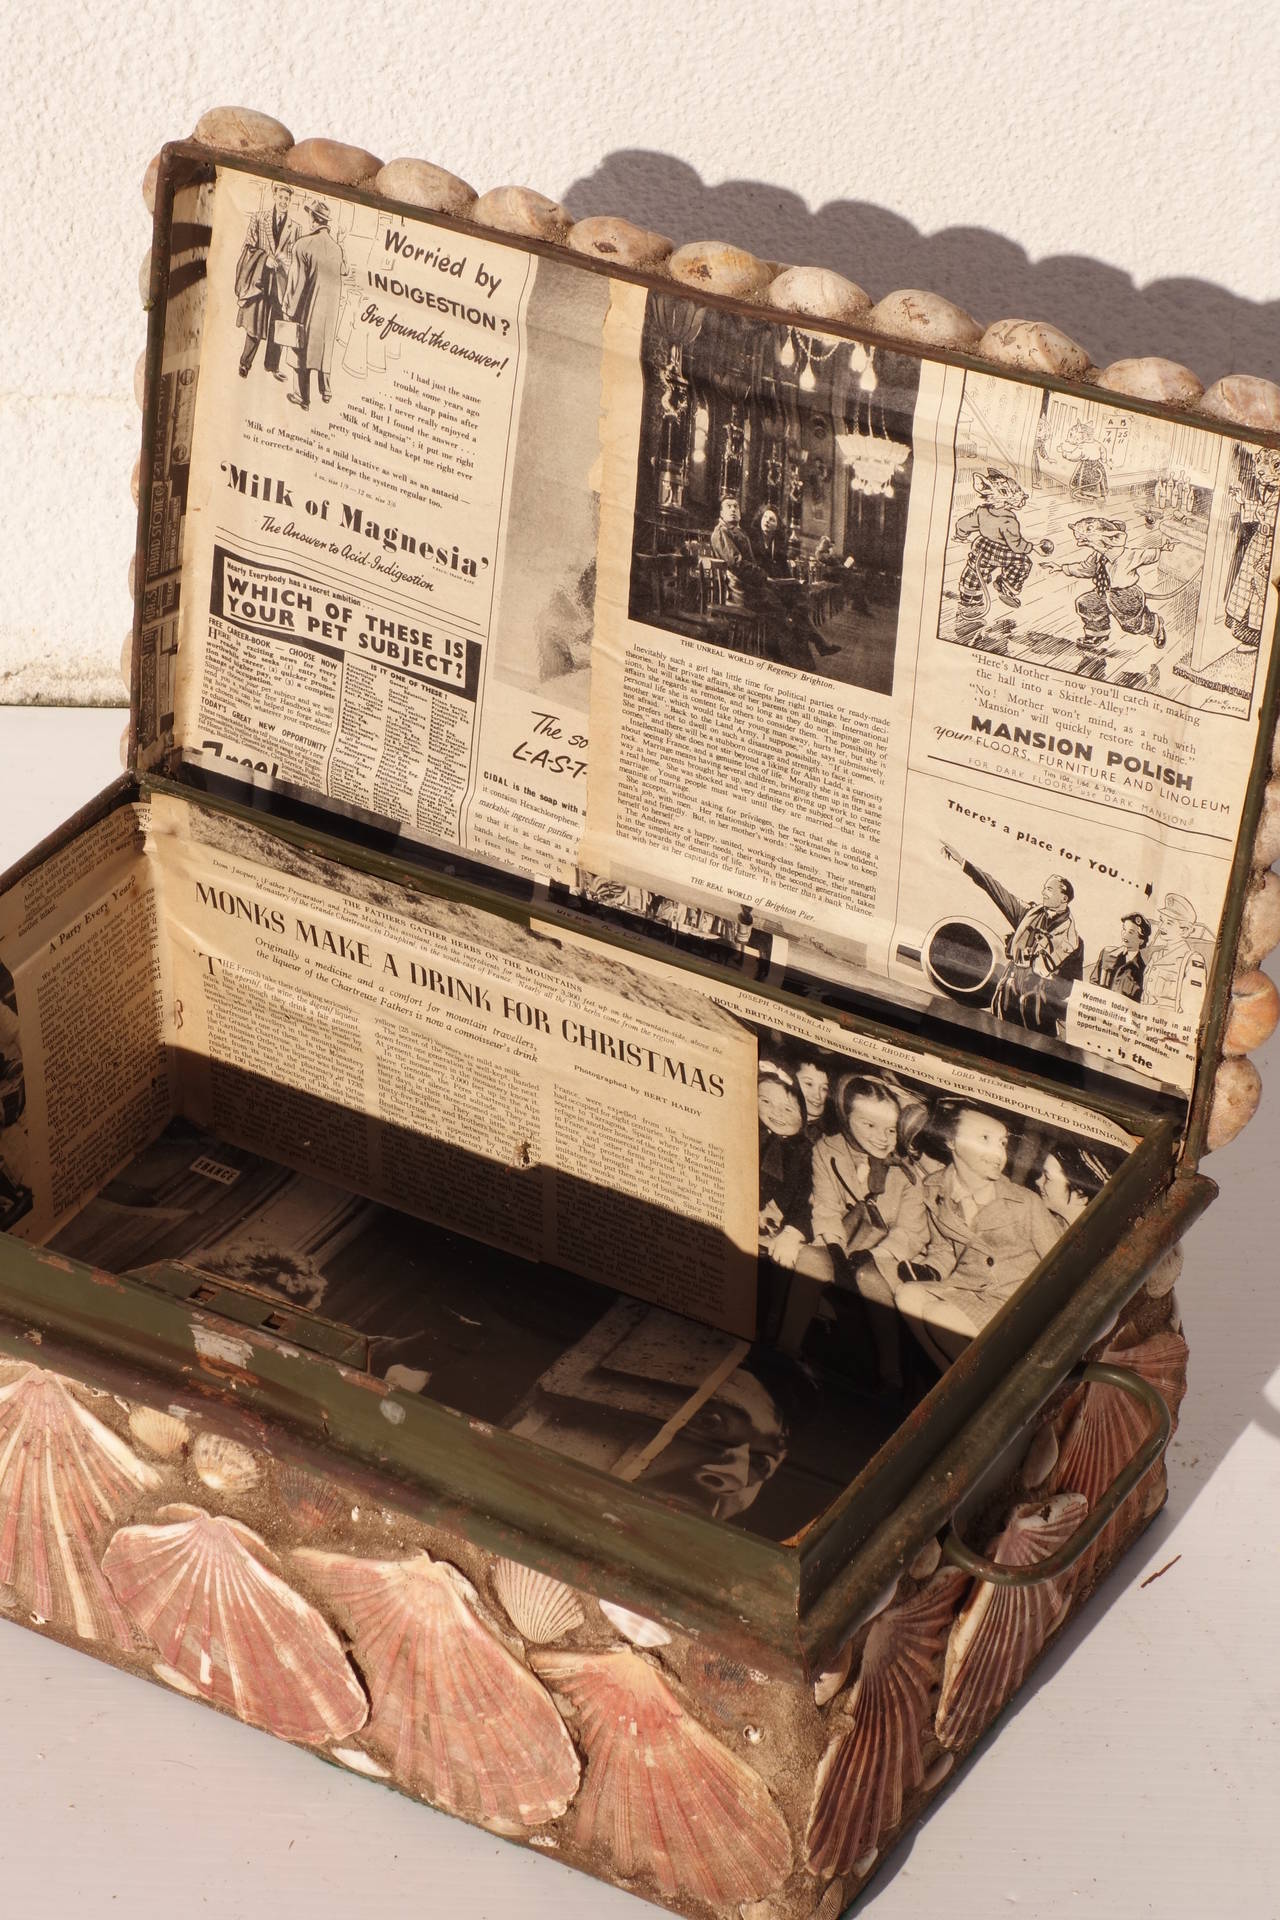 Box with shell decoration and old newspaper lining. Please contact for current availability.